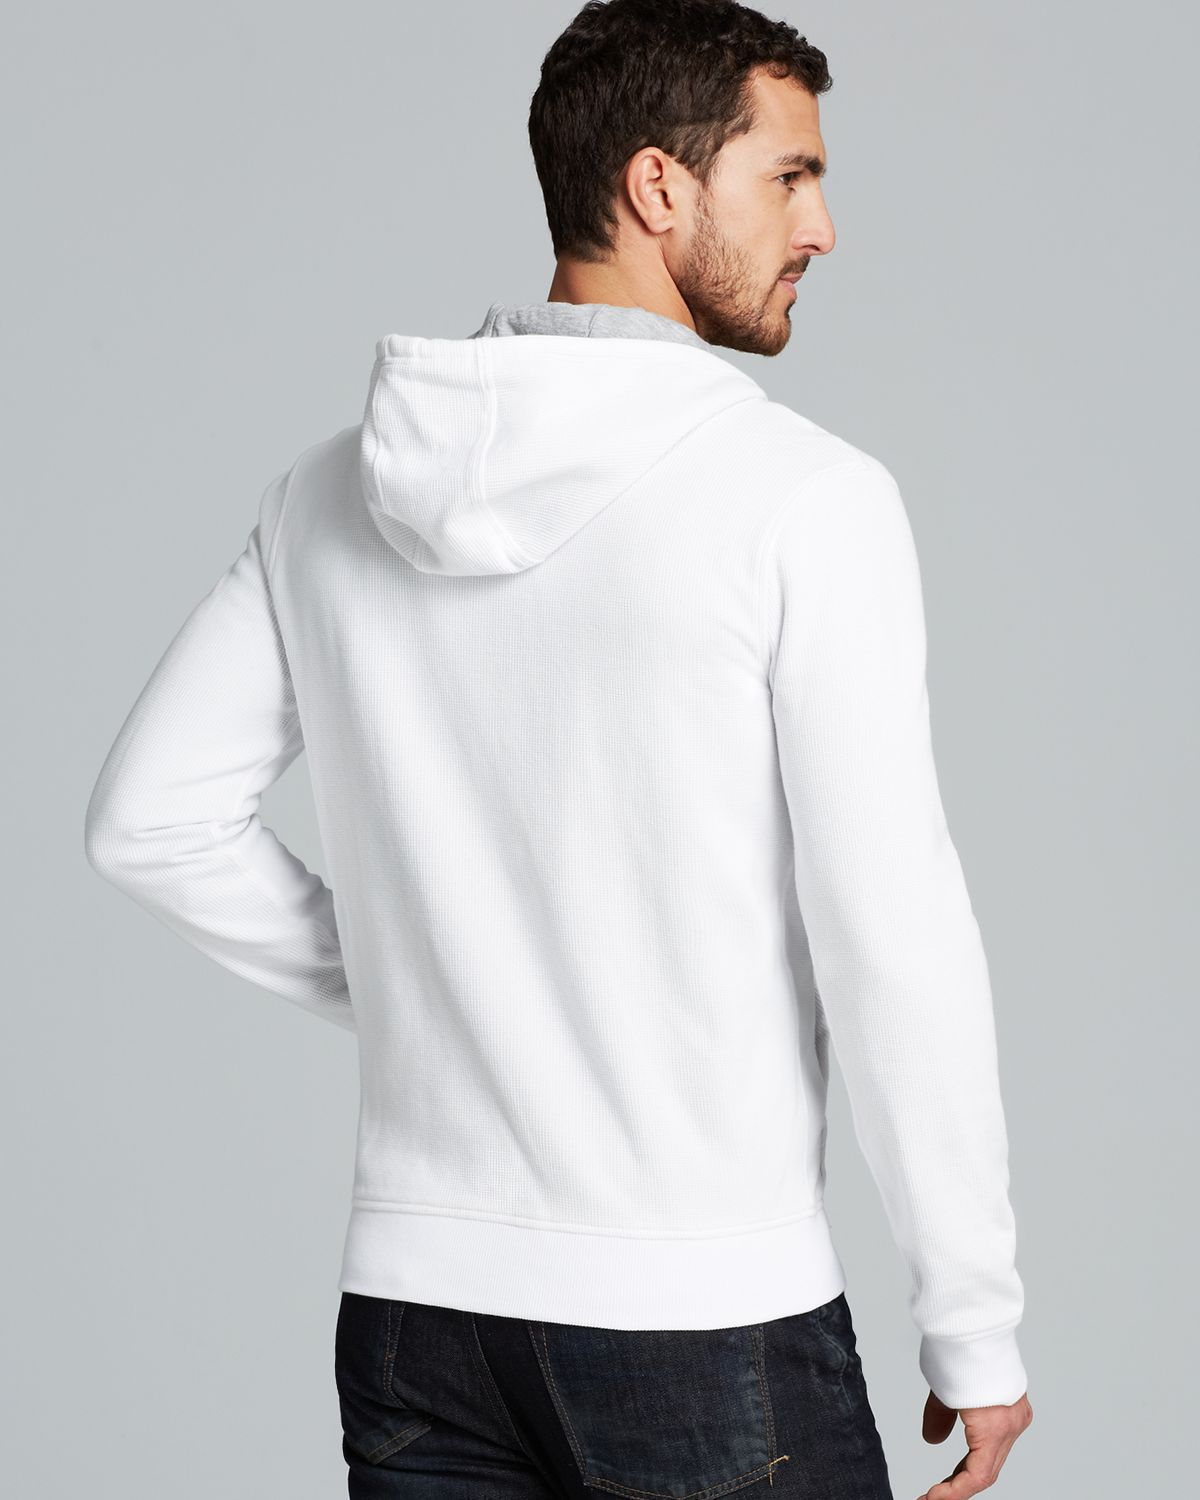 Lyst - Michael Kors Waffle Hoodie in White for Men